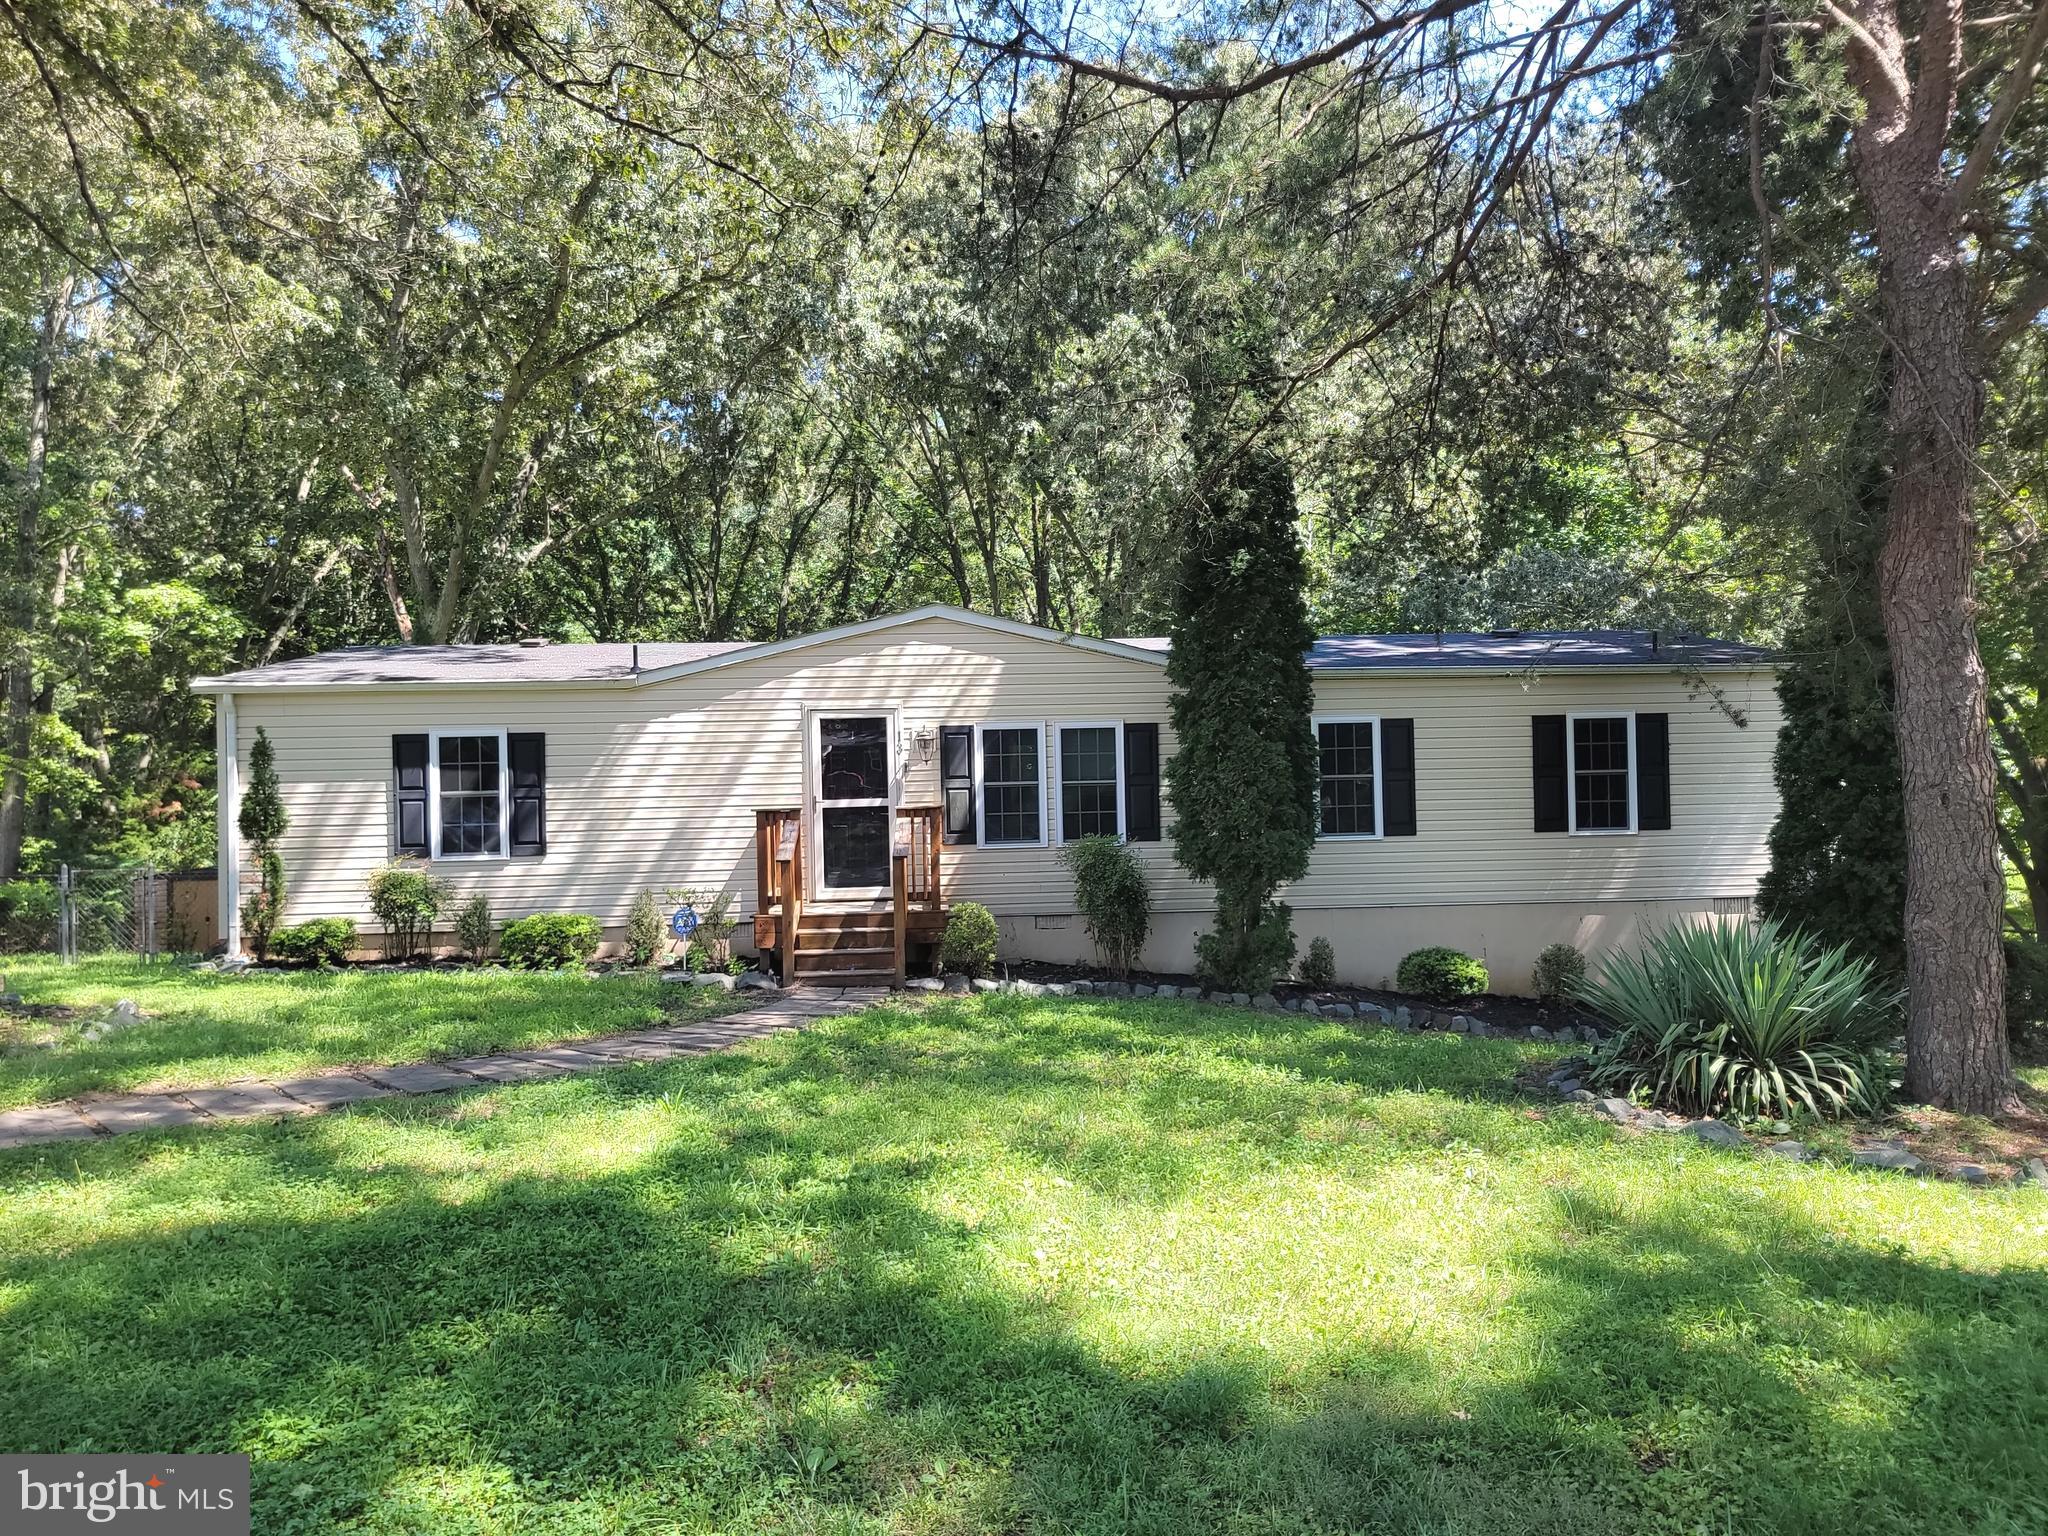 Private and quite neighborhood. It offers 4 bedrooms, 2 bathrooms on 1 acre lot back to trees. New carpet, freshly painted, SS appliances, granite countertop, fenced backyard with a large shed. No HOA. Close to VRE, Quantico, Route 1 and I-95. Schedule your appointment! Open house on 8/7.